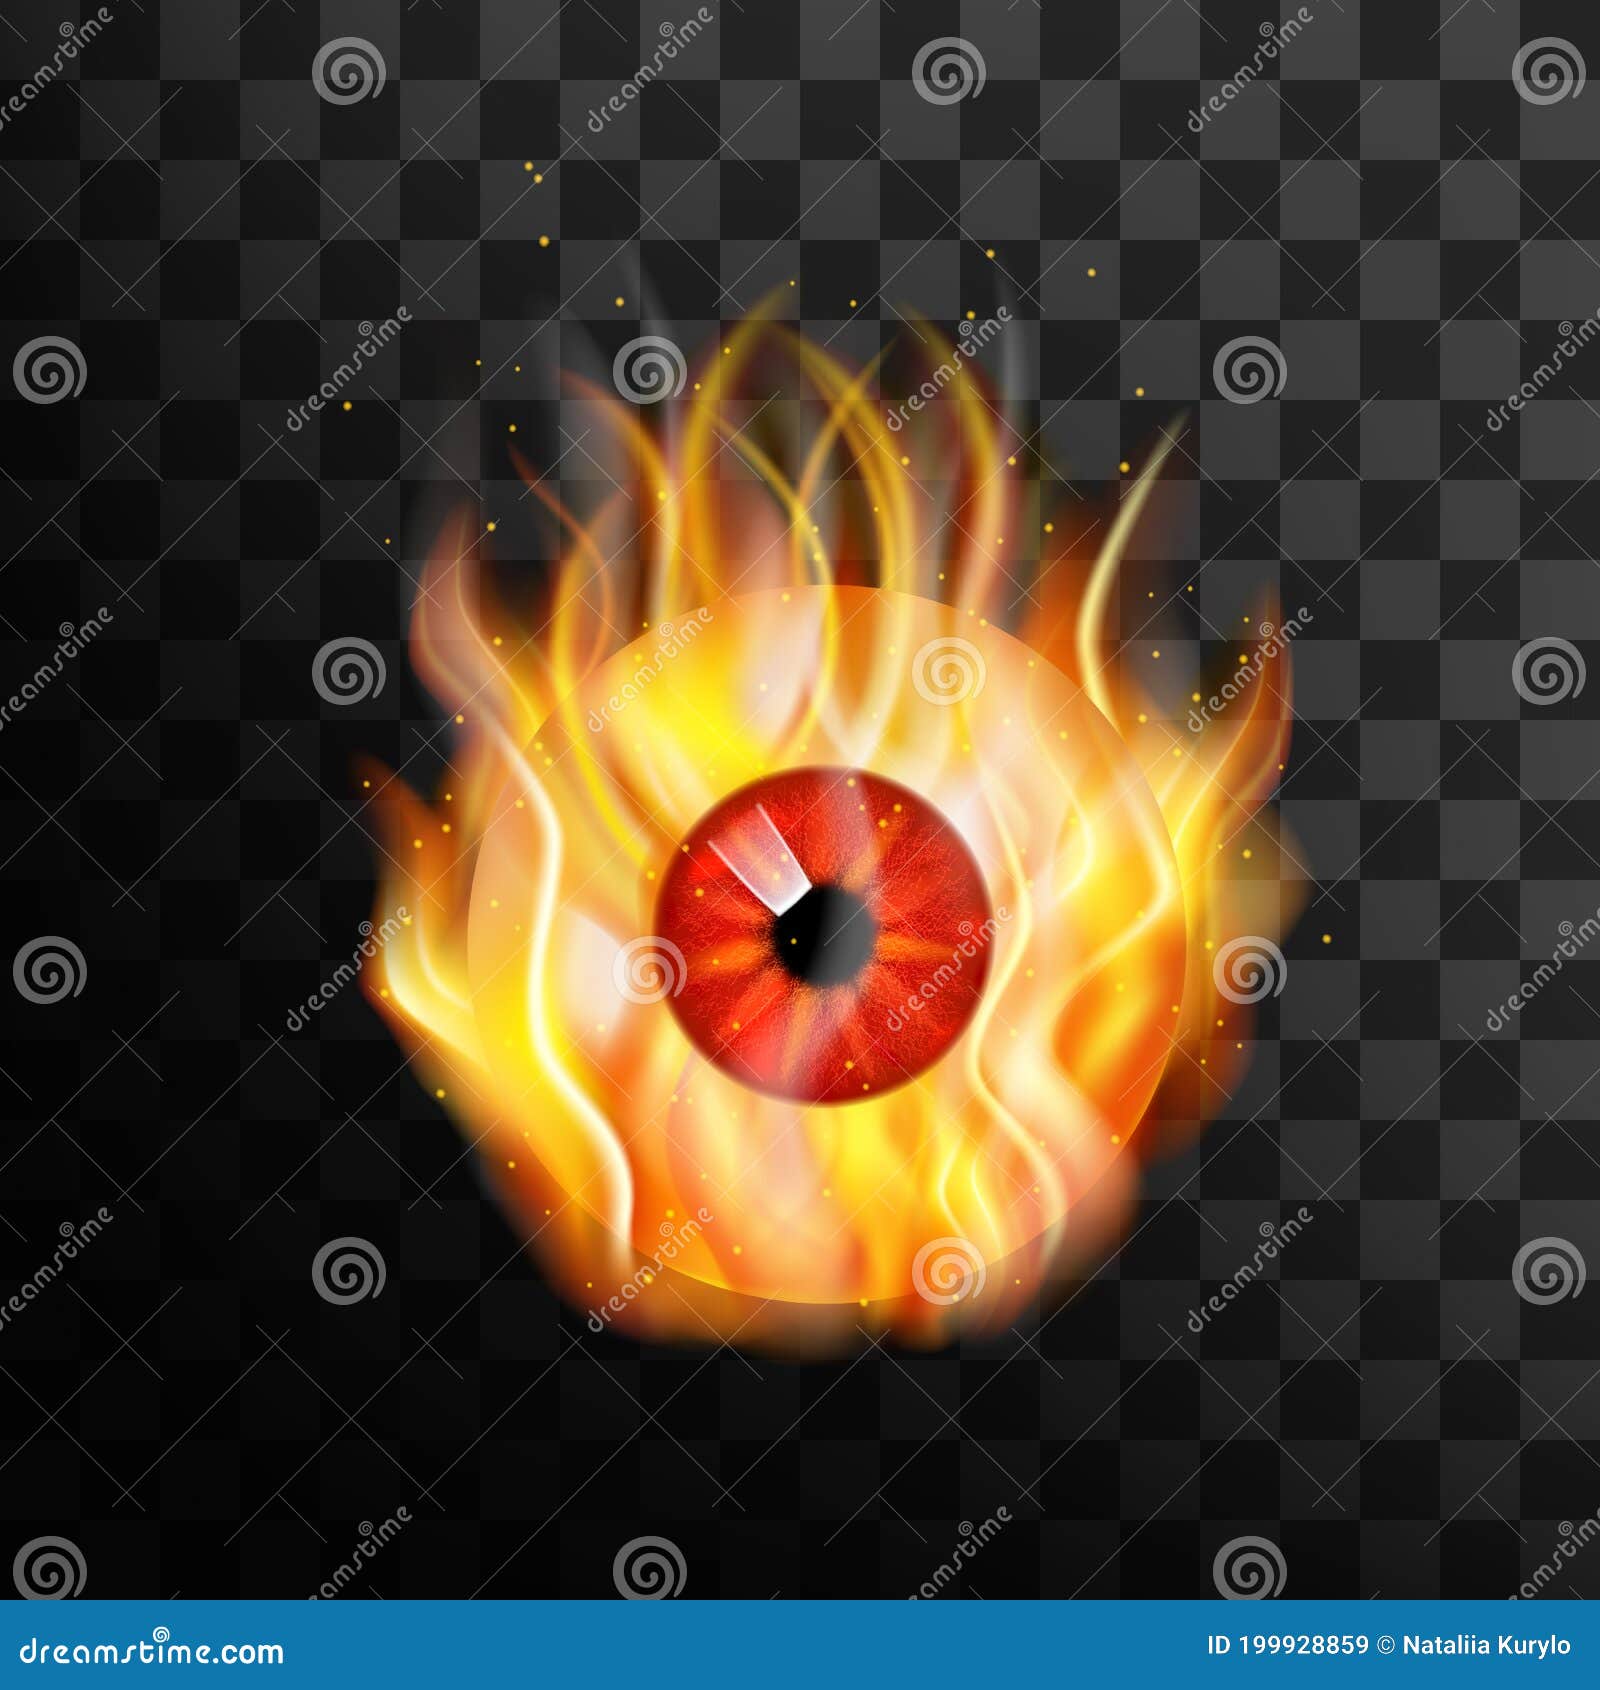 burning red eye, inflammation of eyeball, fire and flames, dryness and burning